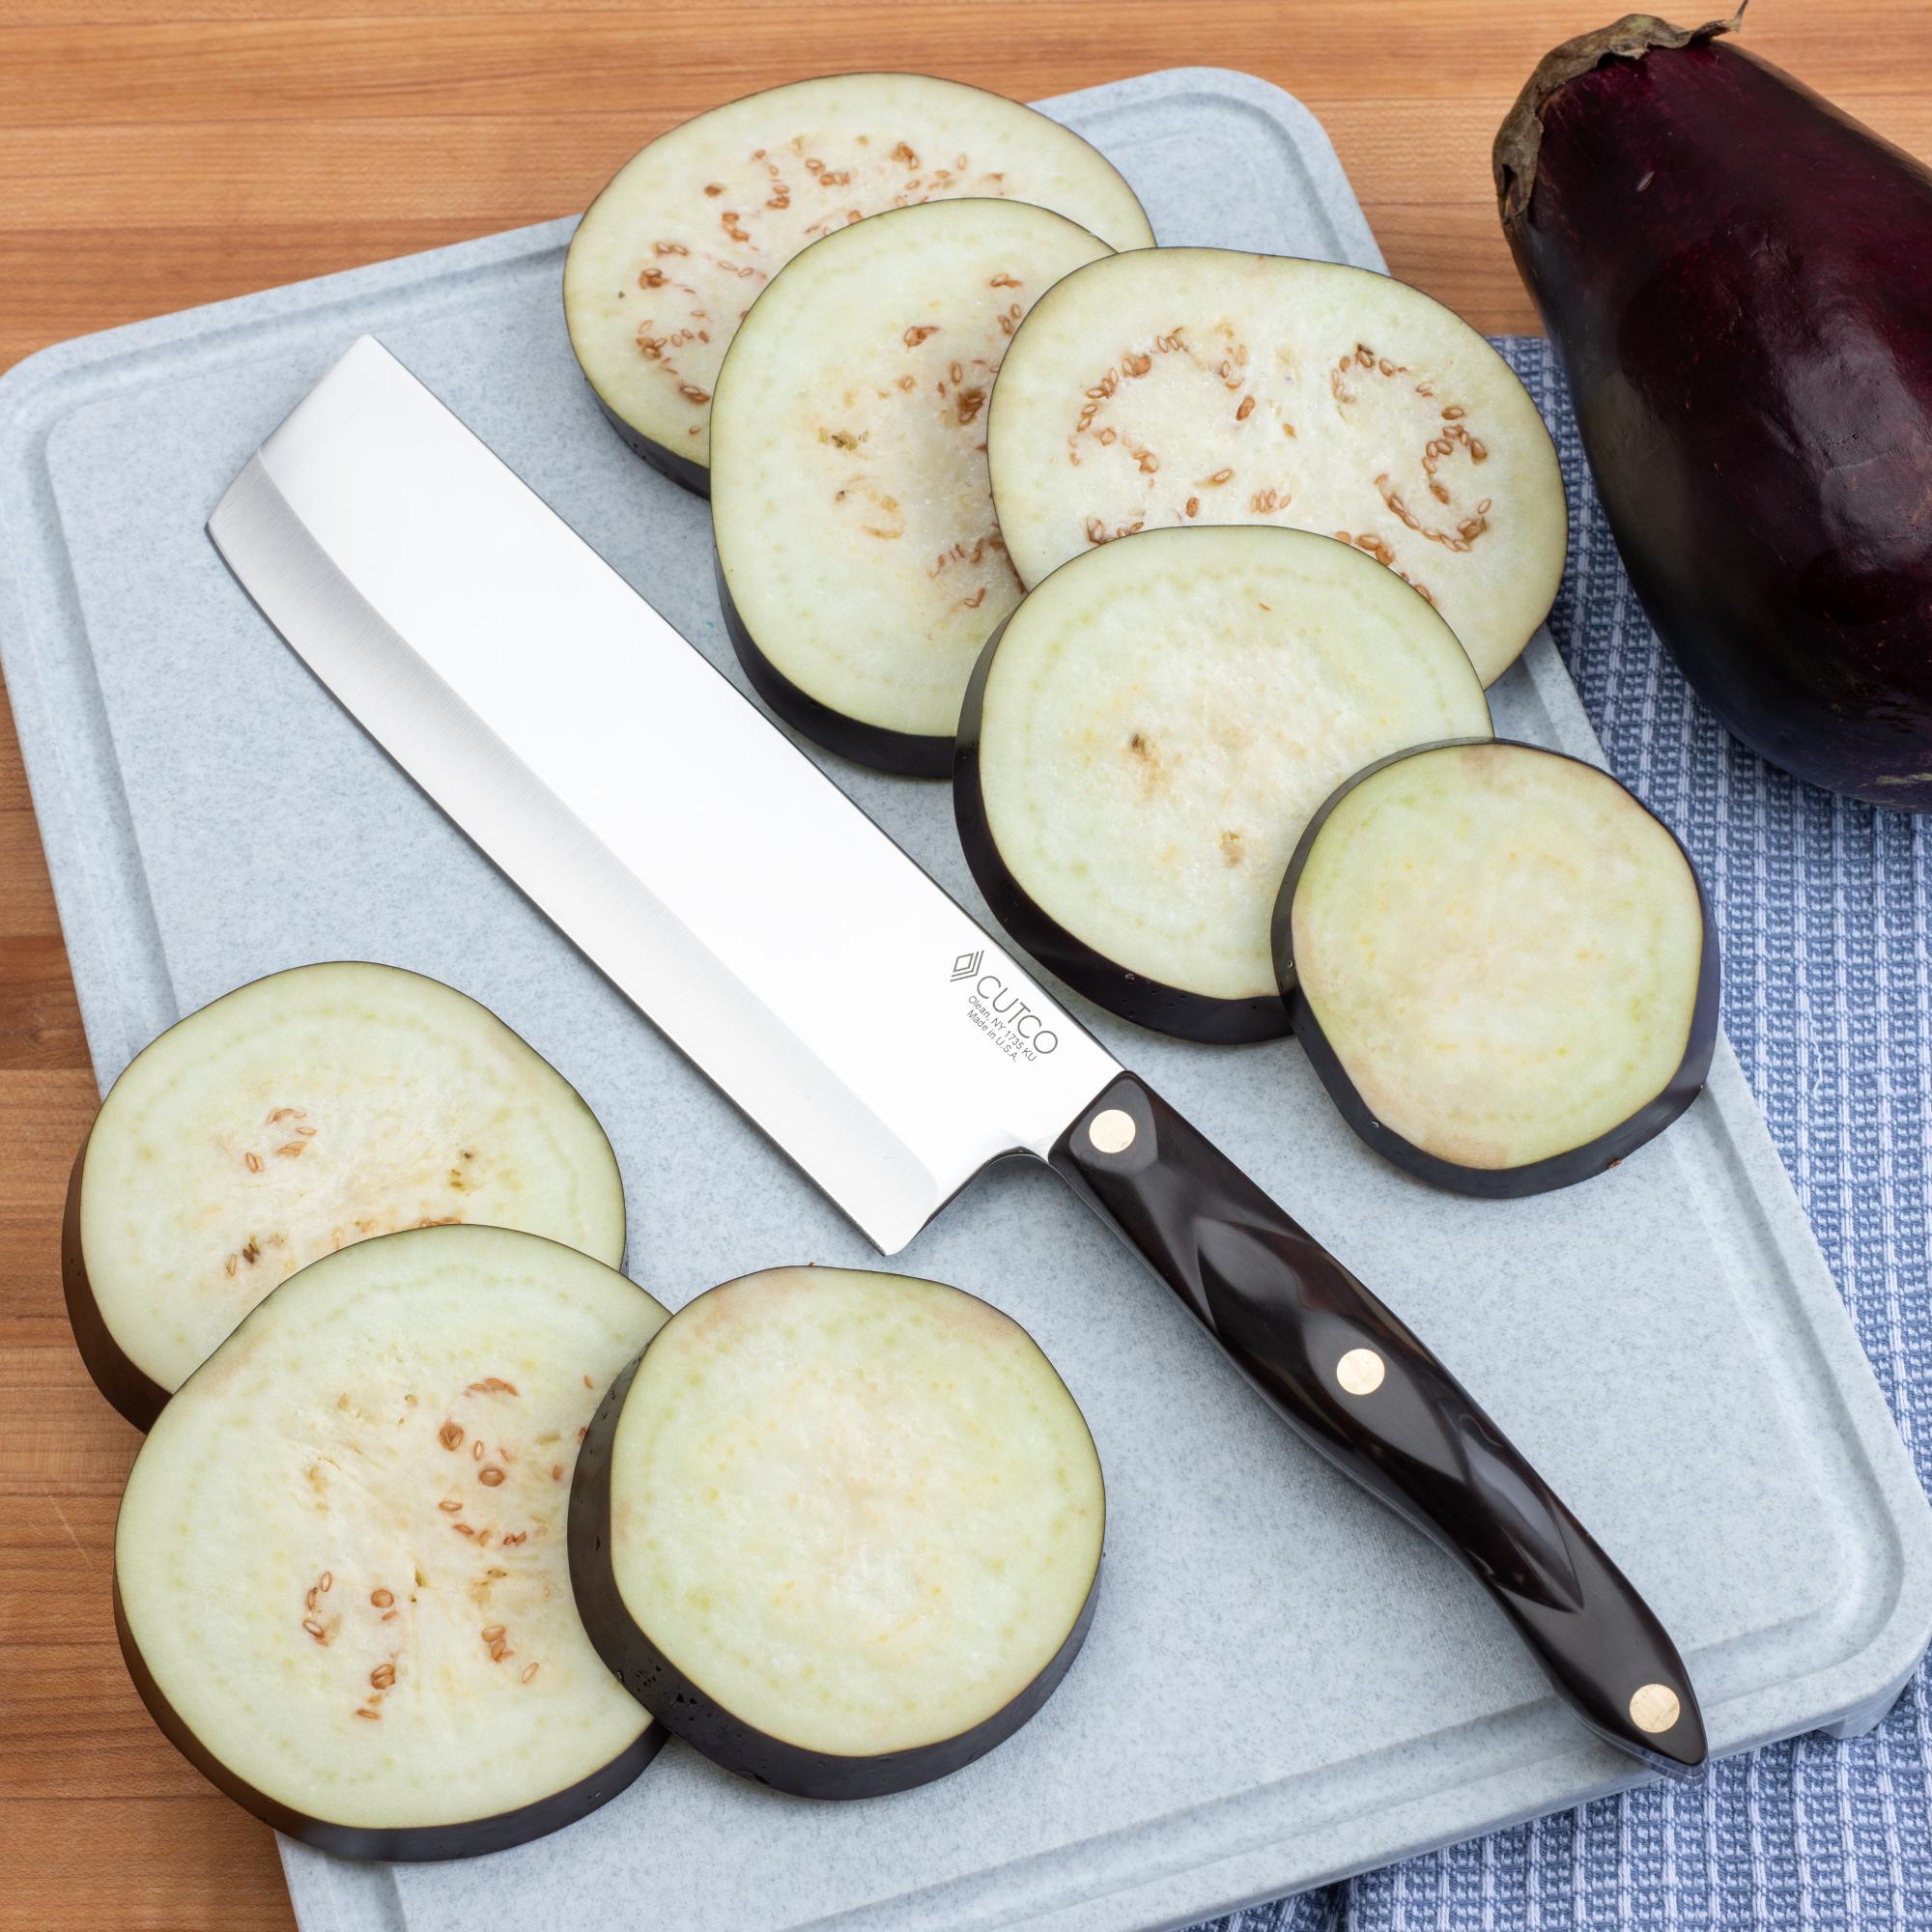 Using the Vegetable Knife to create slices of Eggplants